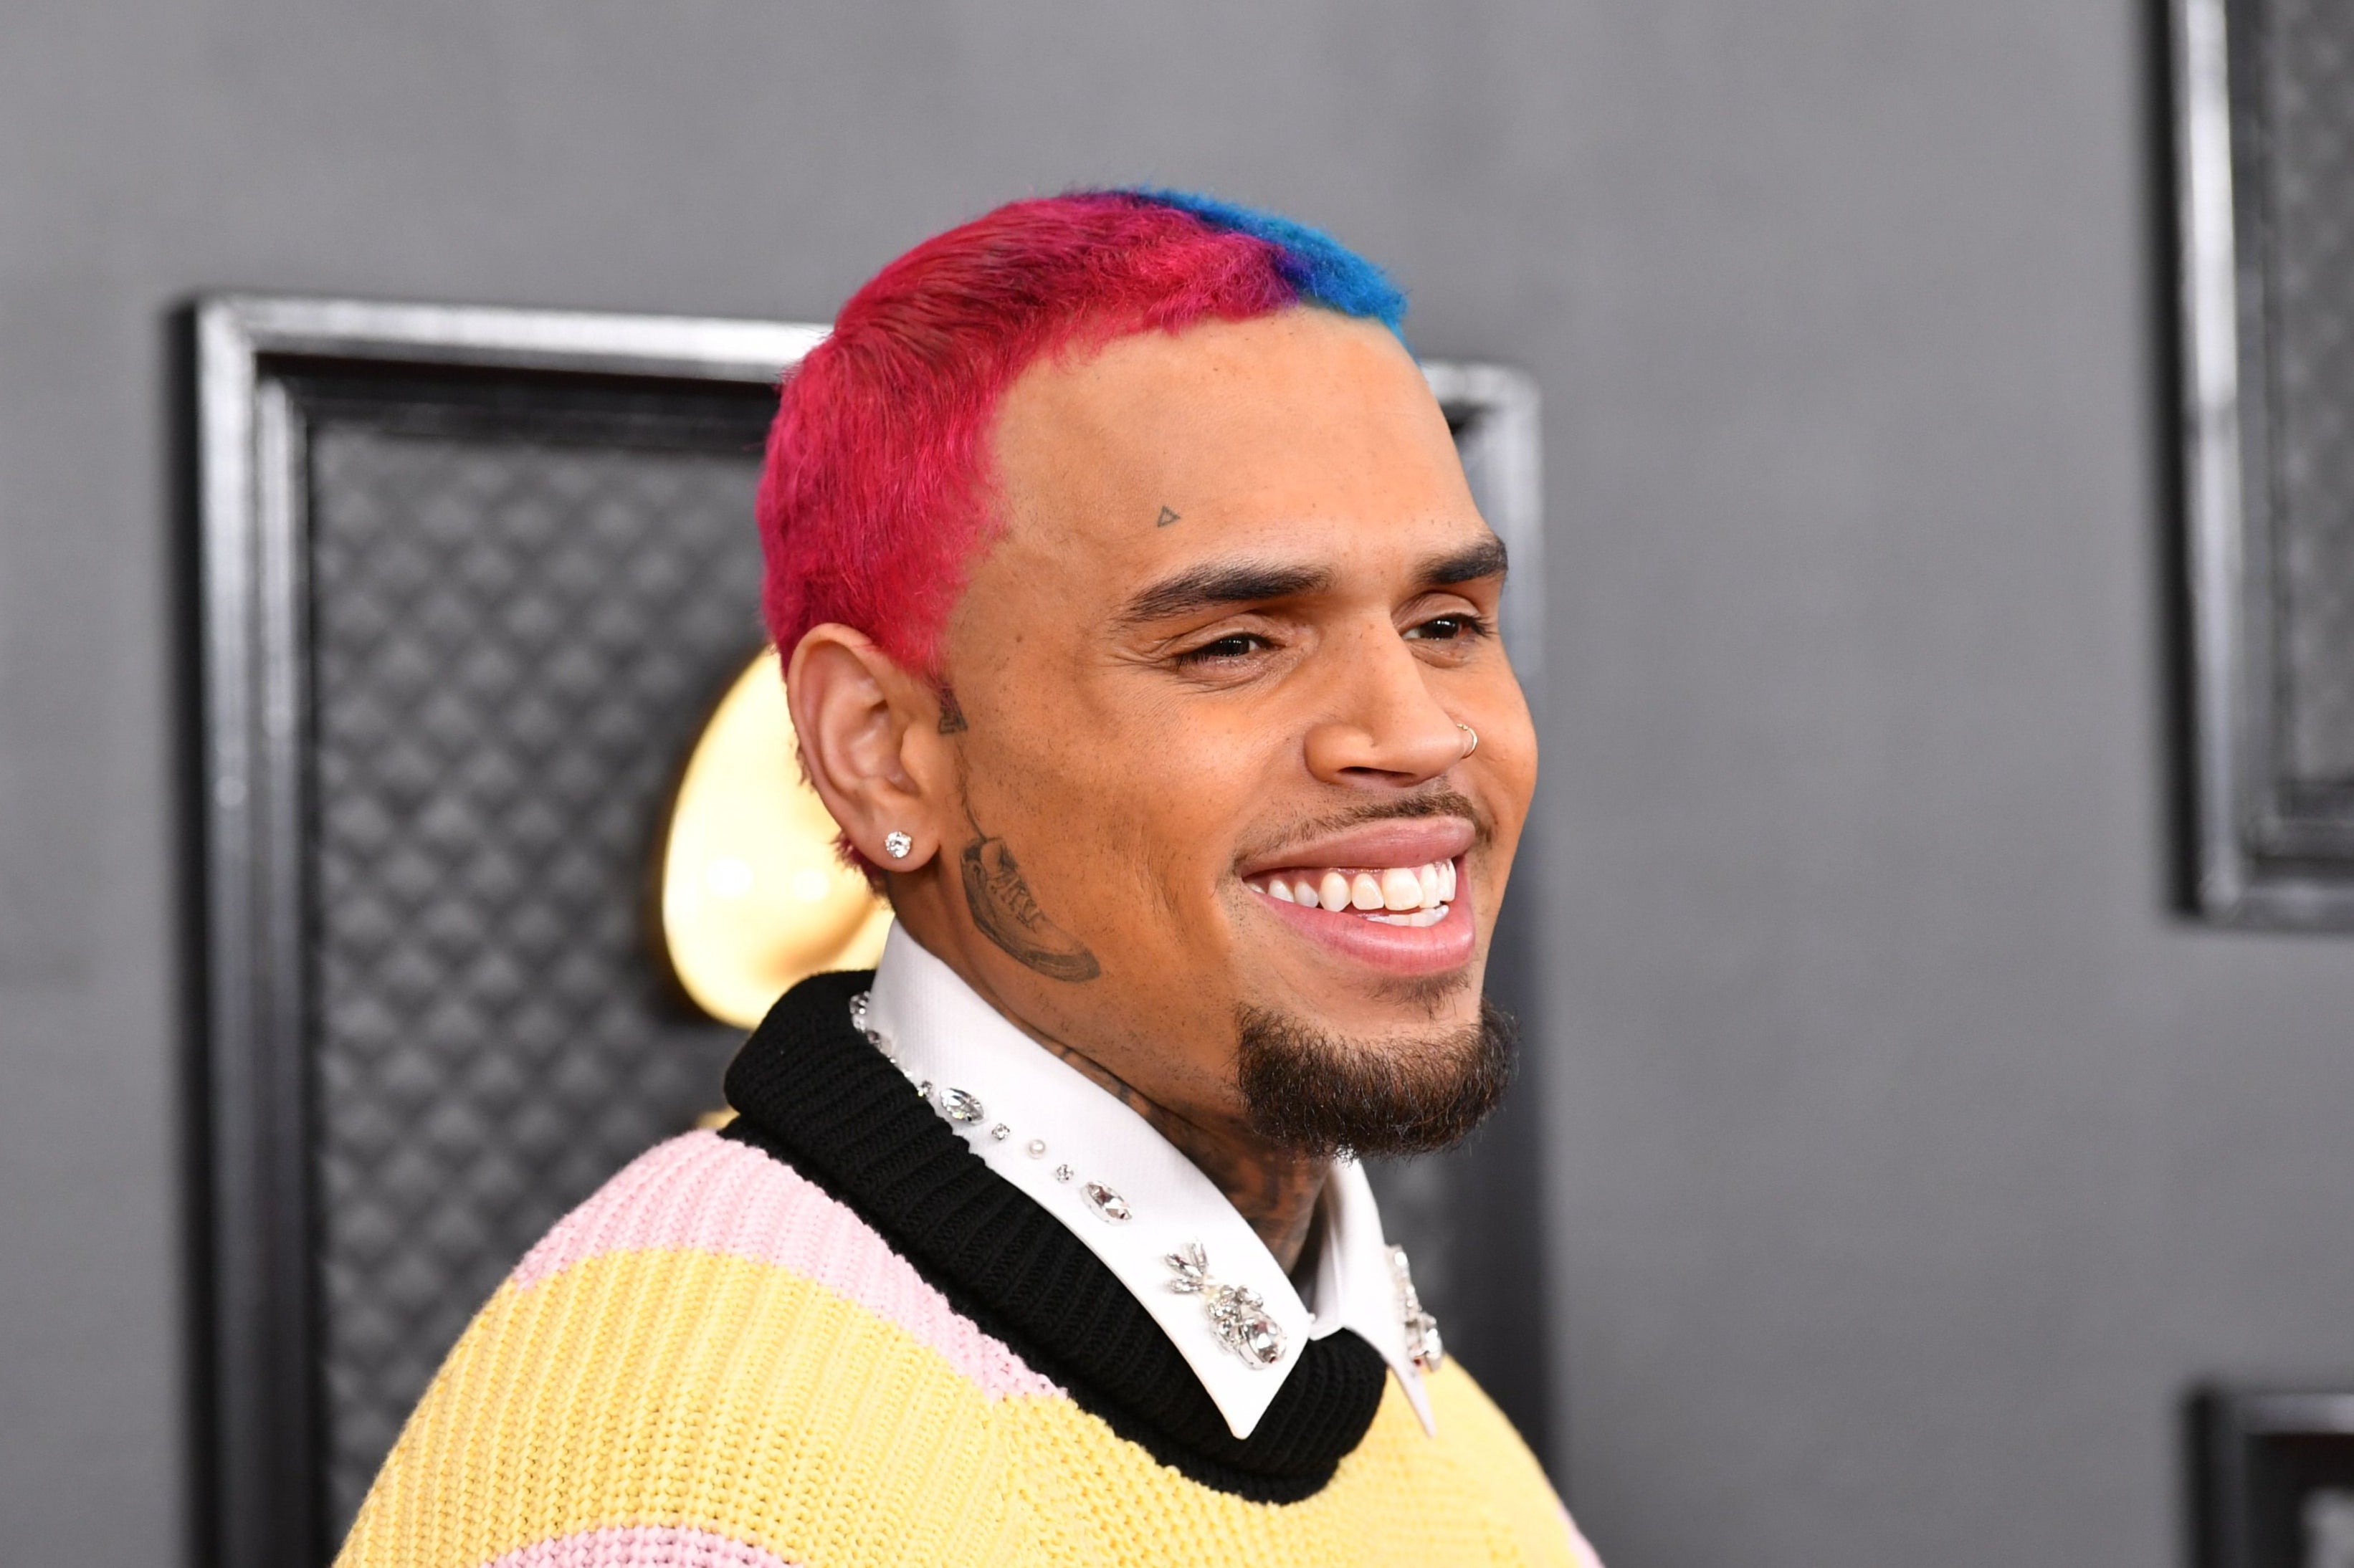 Chris Brown is accused of carrying out an “unprovoked” attack on four men